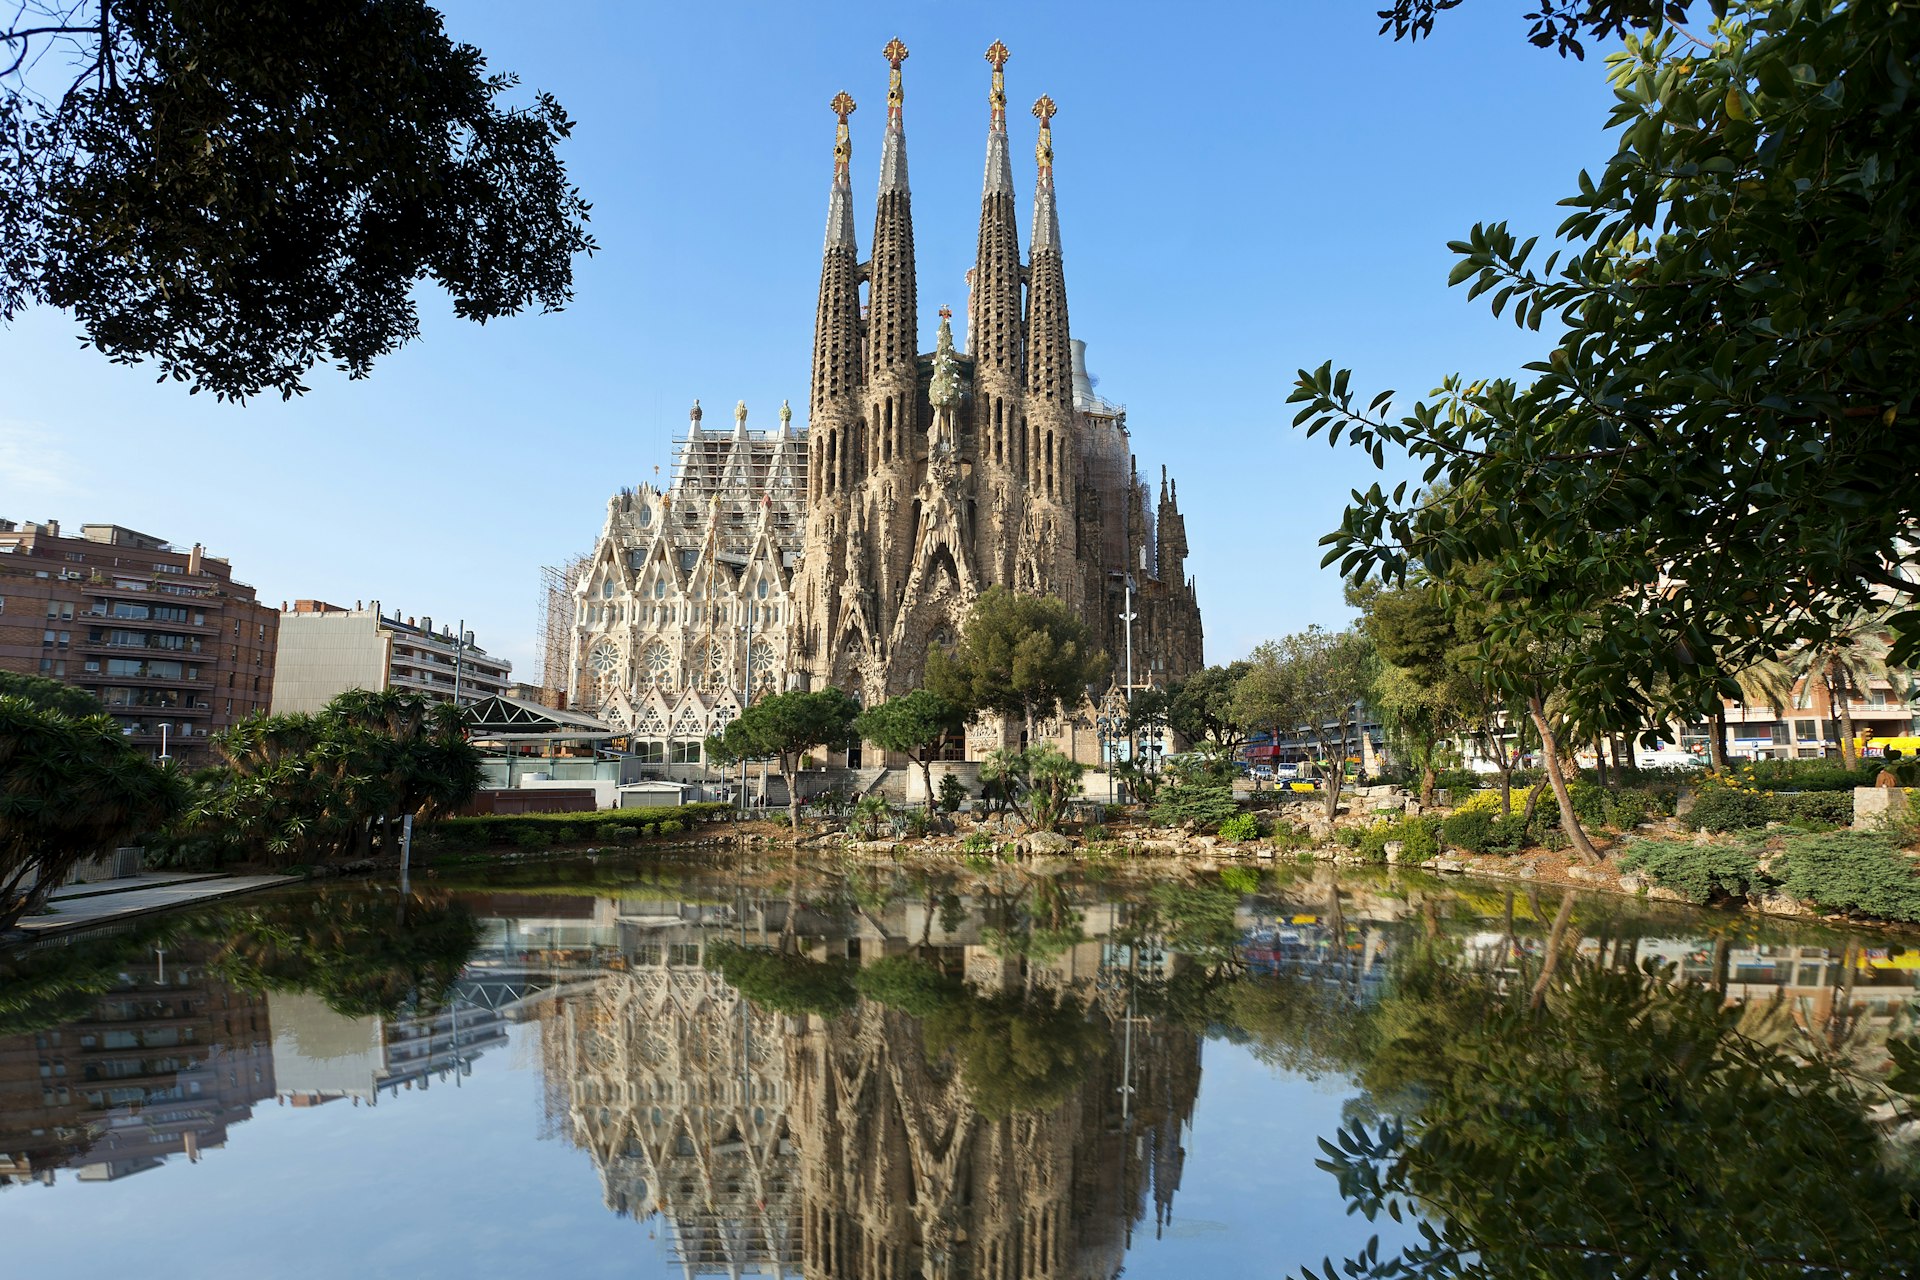 A very tall church with four individual spires reflected in a pond